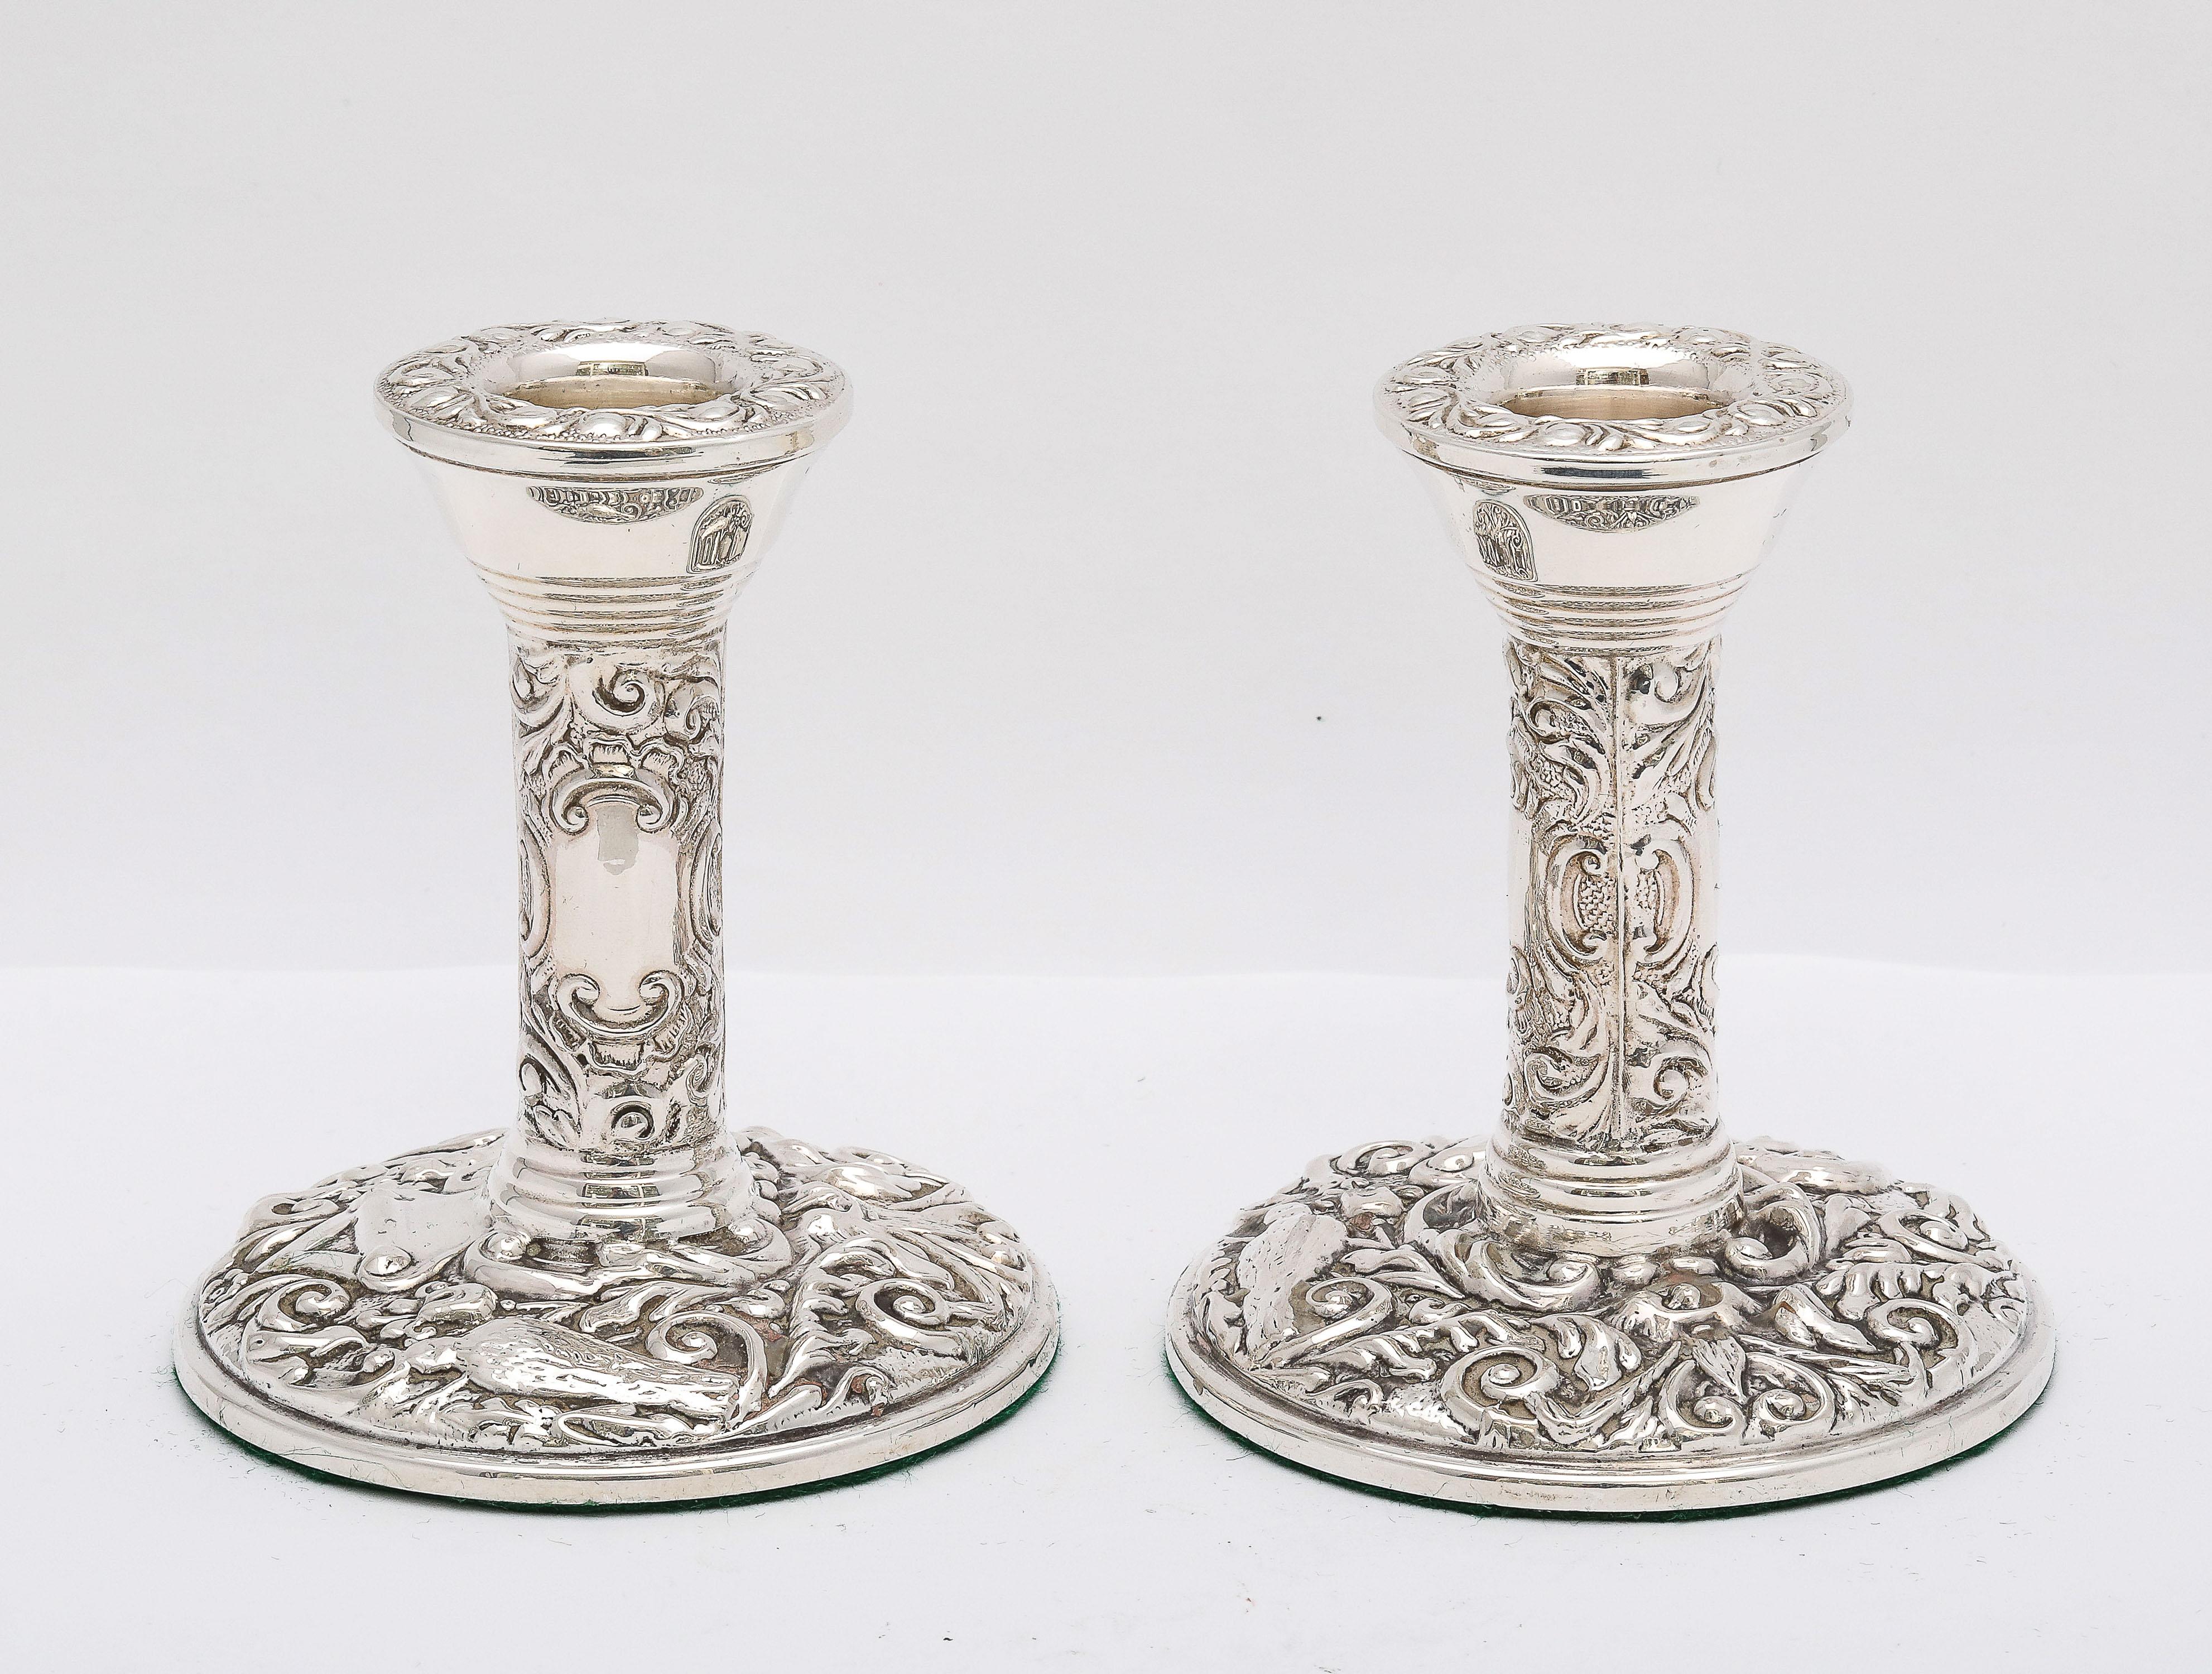 English Pair of Victorian-Style Sterling Silver Candlesticks